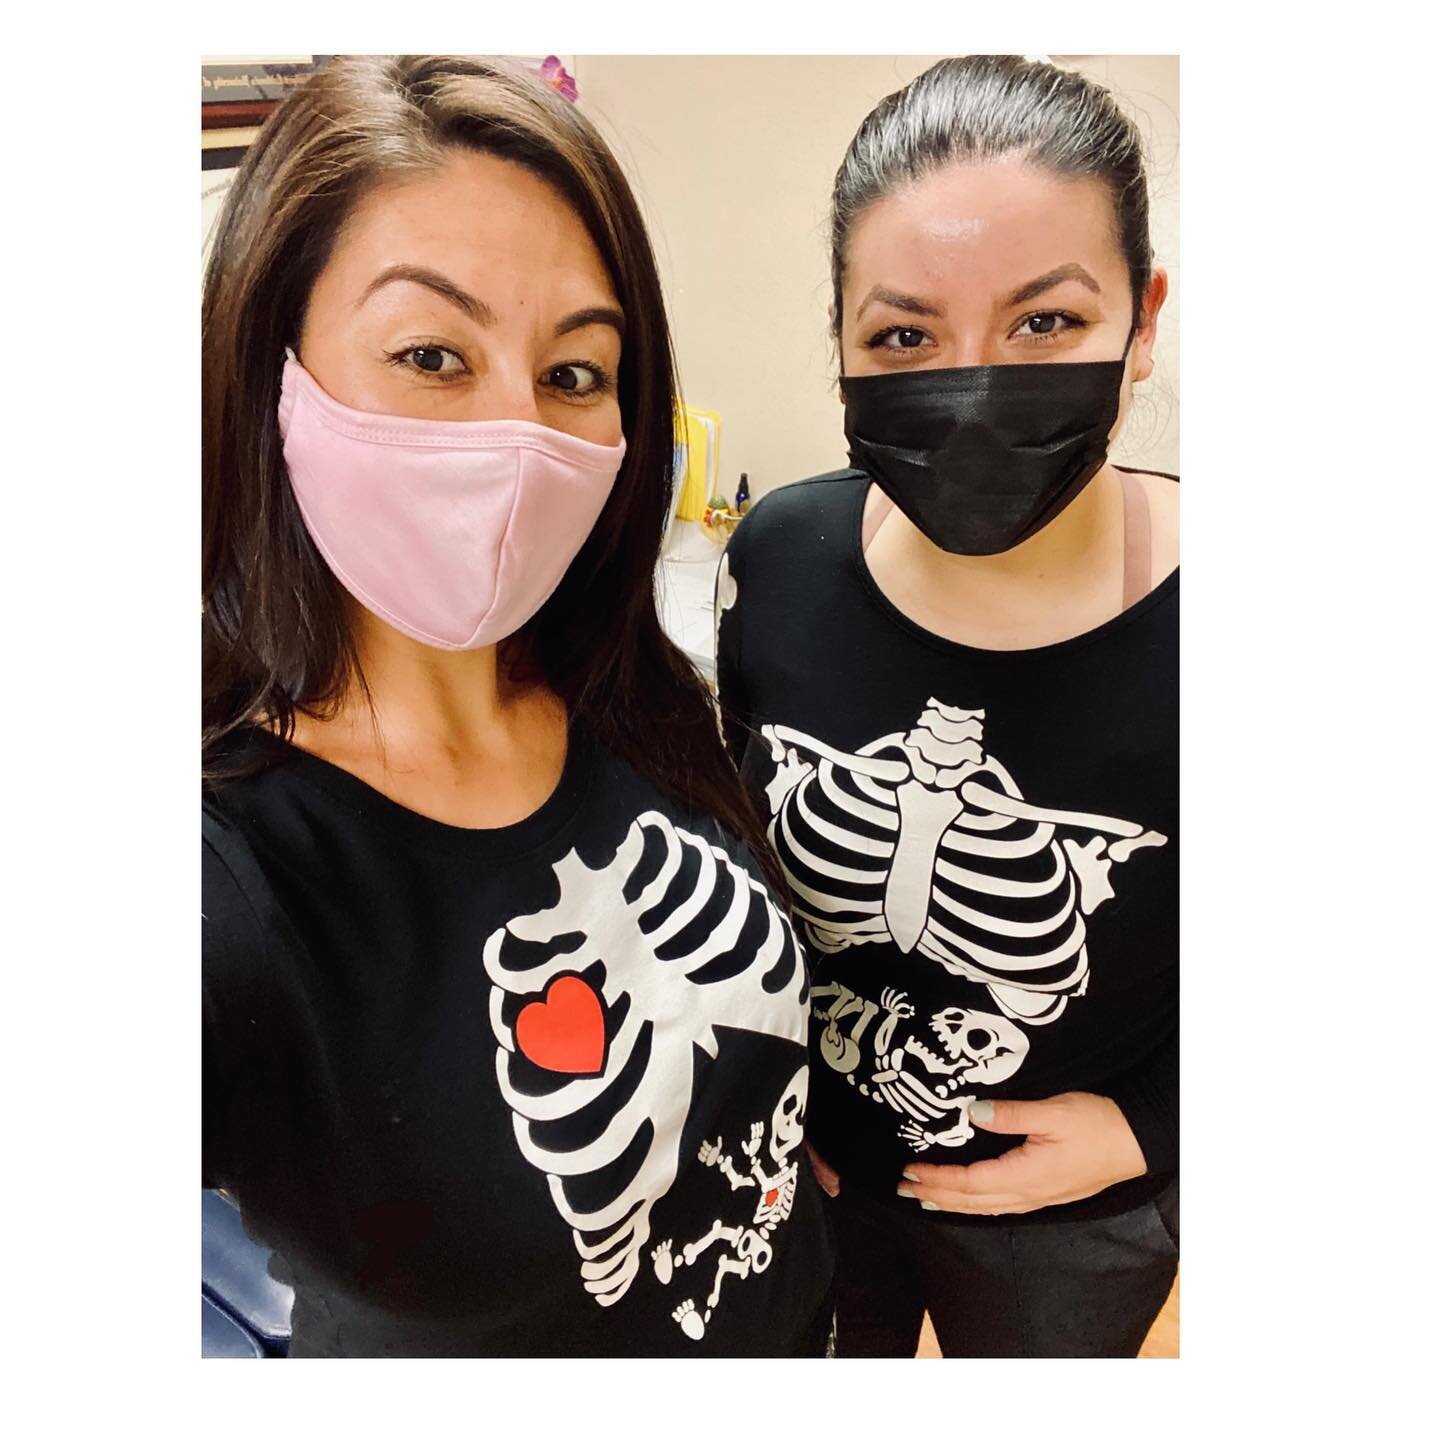 Ran into @doctor.jessflores in the office between patients, found we were matching Baby/Halloween spirit! March chiro babies coming soon! #unintentionalmatching #skeletonbabes